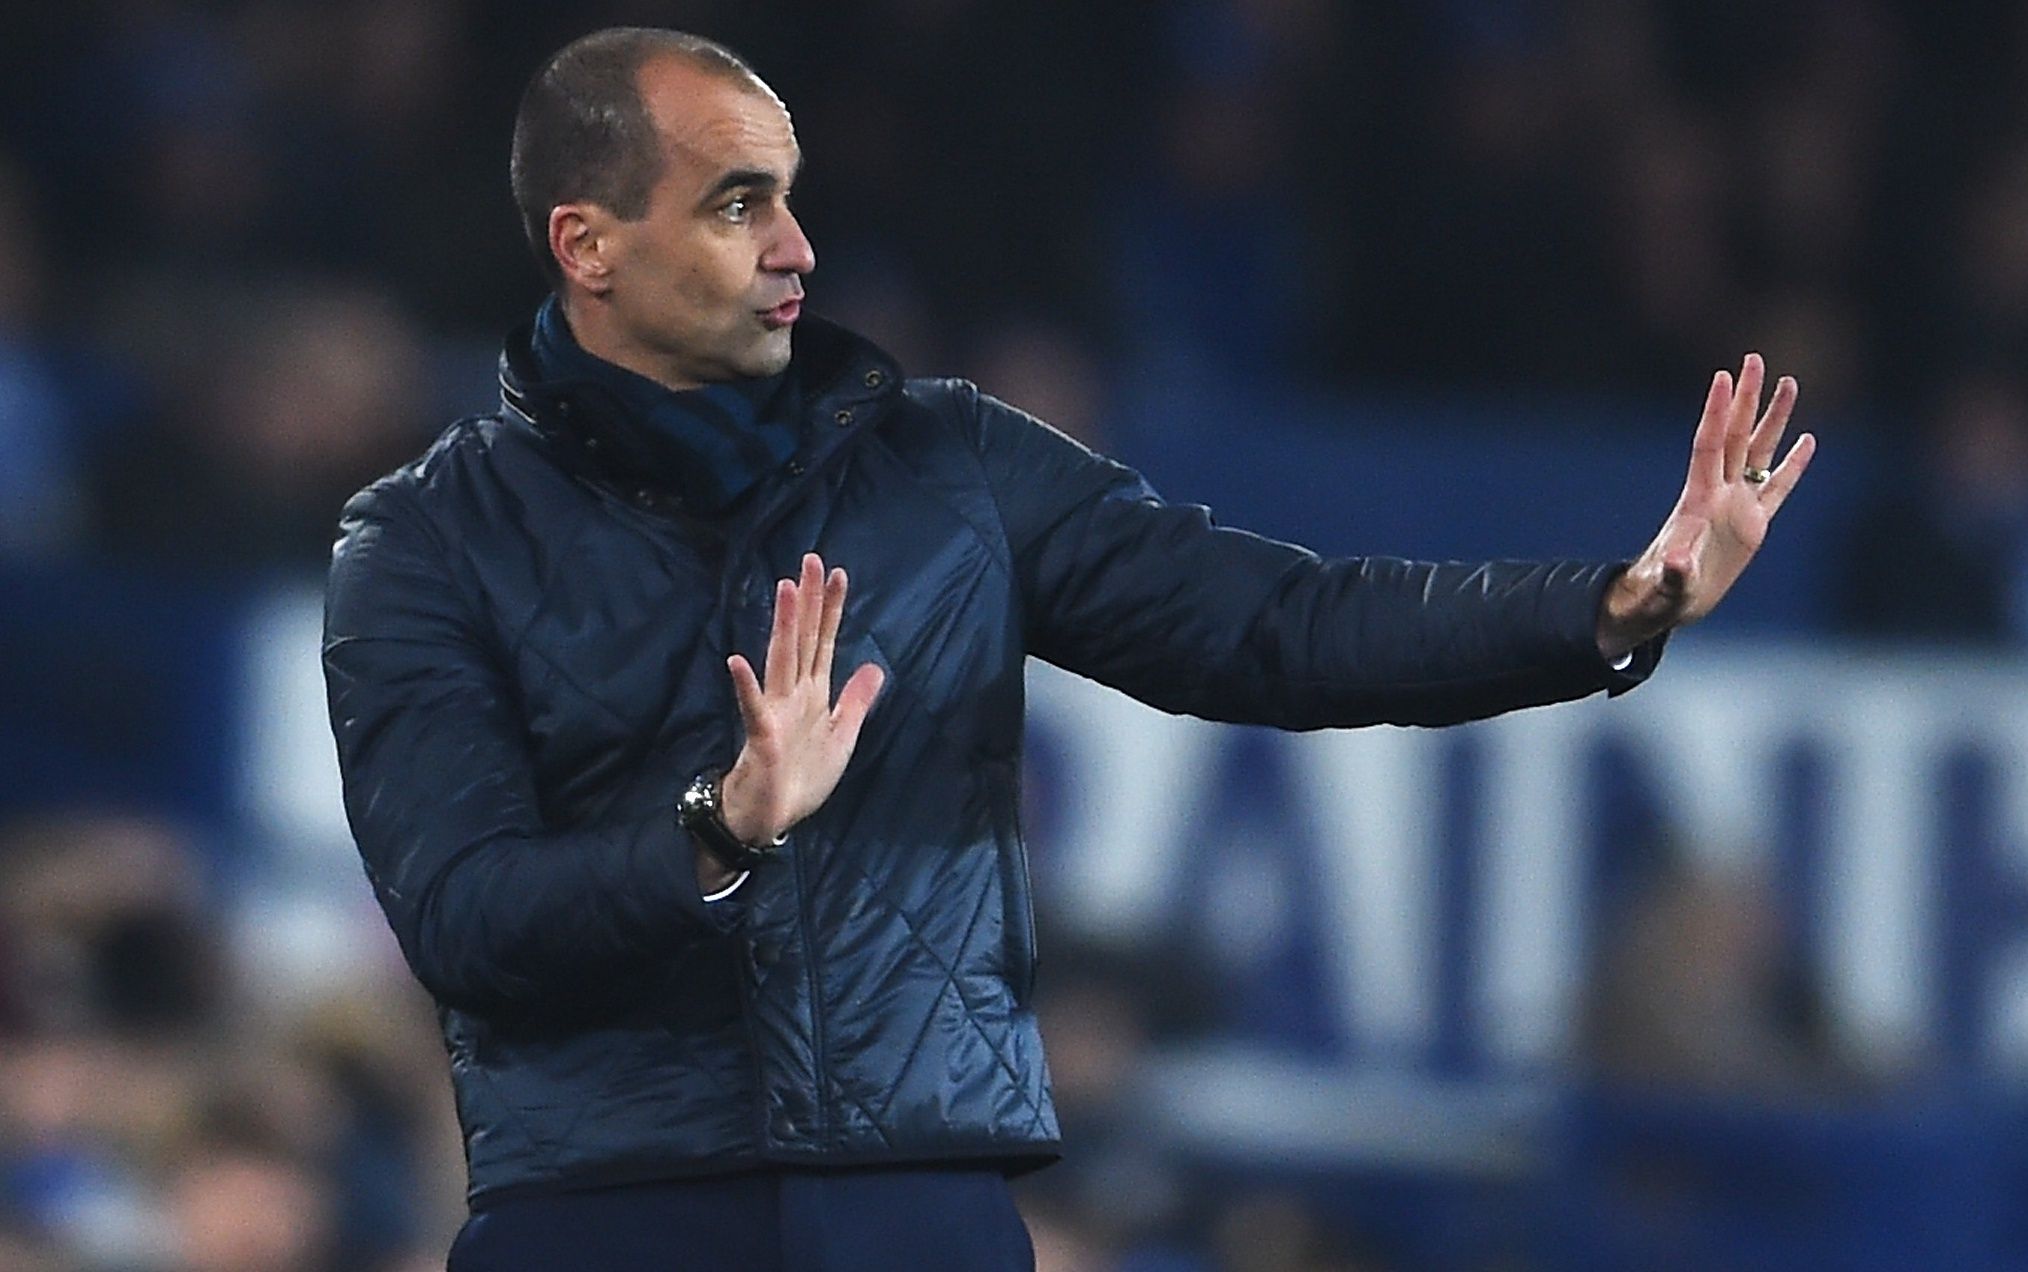 LIVERPOOL, ENGLAND - JANUARY 06: Roberto Martinez, manager of Everton gives instructions during the Capital One Cup Semi Final First Leg match between Everton and Manchester City at Goodison Park on January 6, 2016 in Liverpool, England. (Photo by Laurence Griffiths/Getty Images)